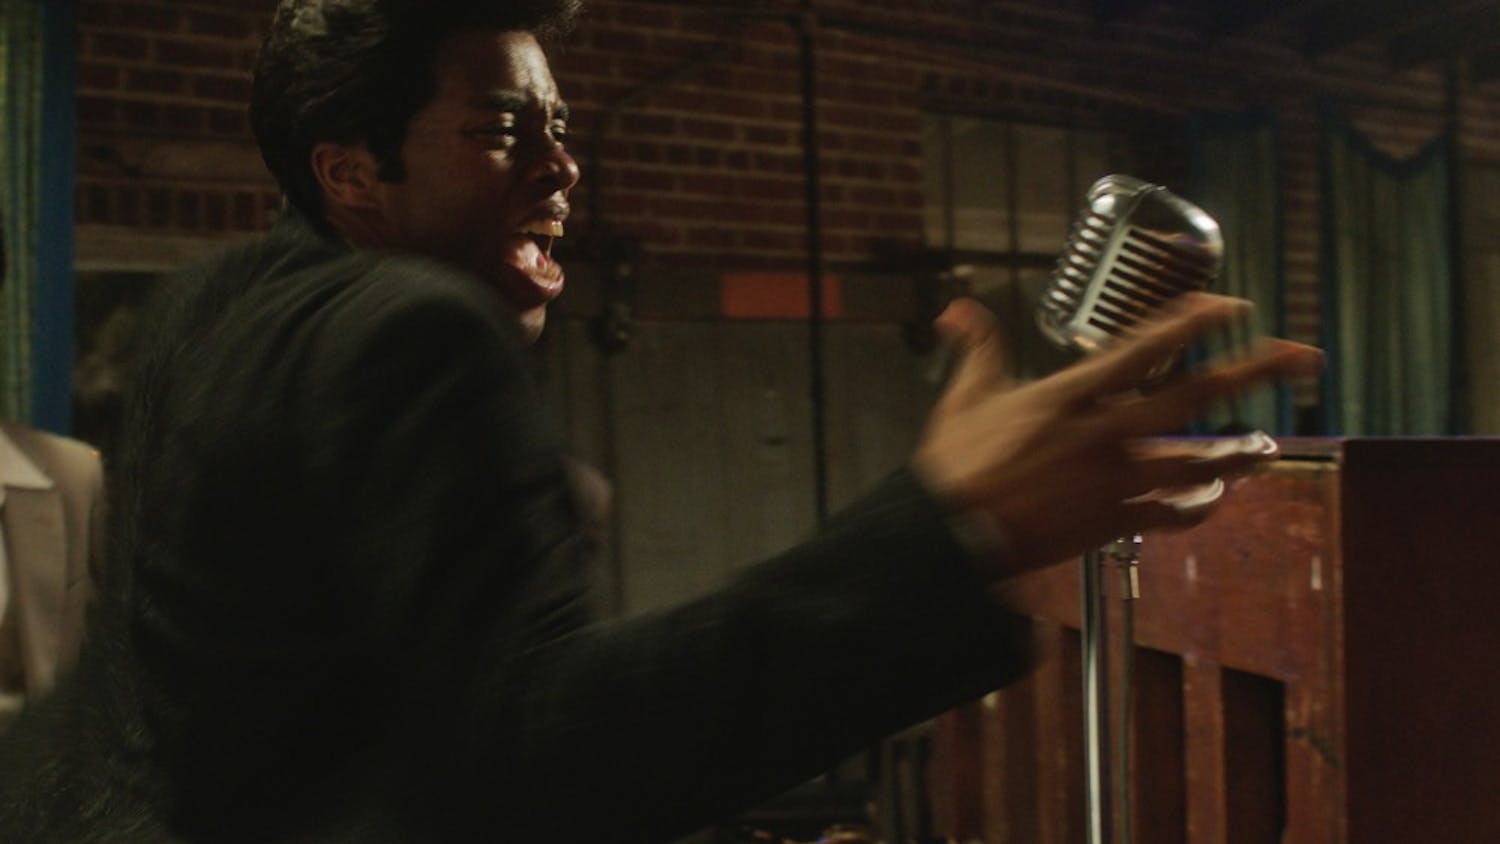 CHADWICK BOSEMAN as James Brown in ?Get on Up?.  Based on the incredible life story of the Godfather of Soul, the film will give a fearless look inside the music, moves and moods of Brown, taking audiences on the journey from his impoverished childhood to his evolution into one of the most influential figures of the 20th century.  